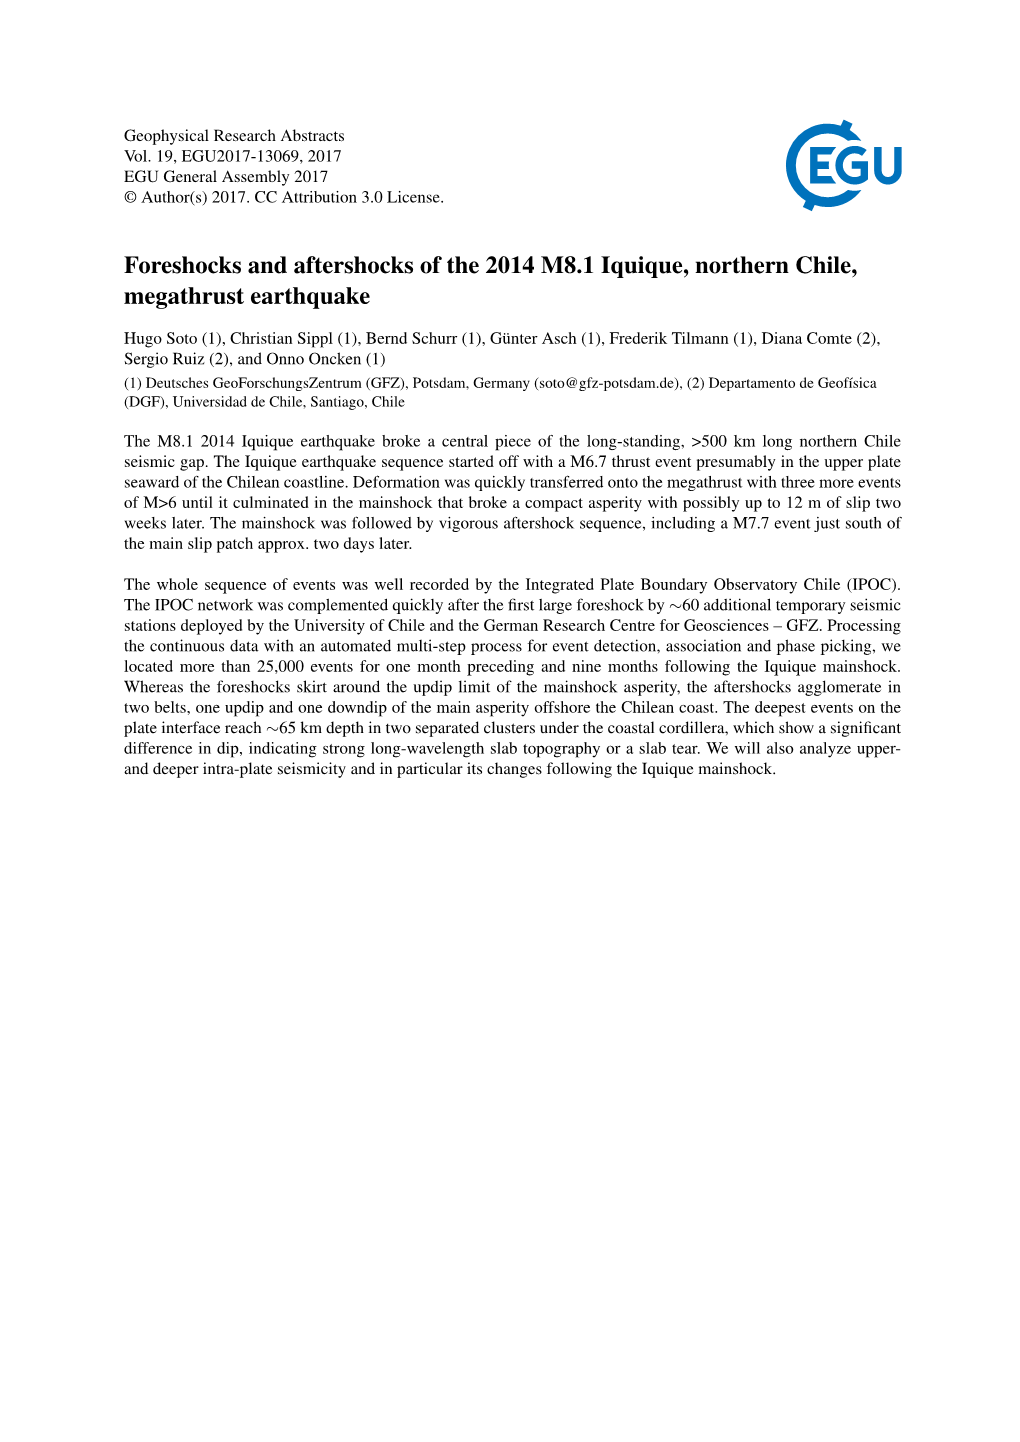 Foreshocks and Aftershocks of the 2014 M8.1 Iquique, Northern Chile, Megathrust Earthquake